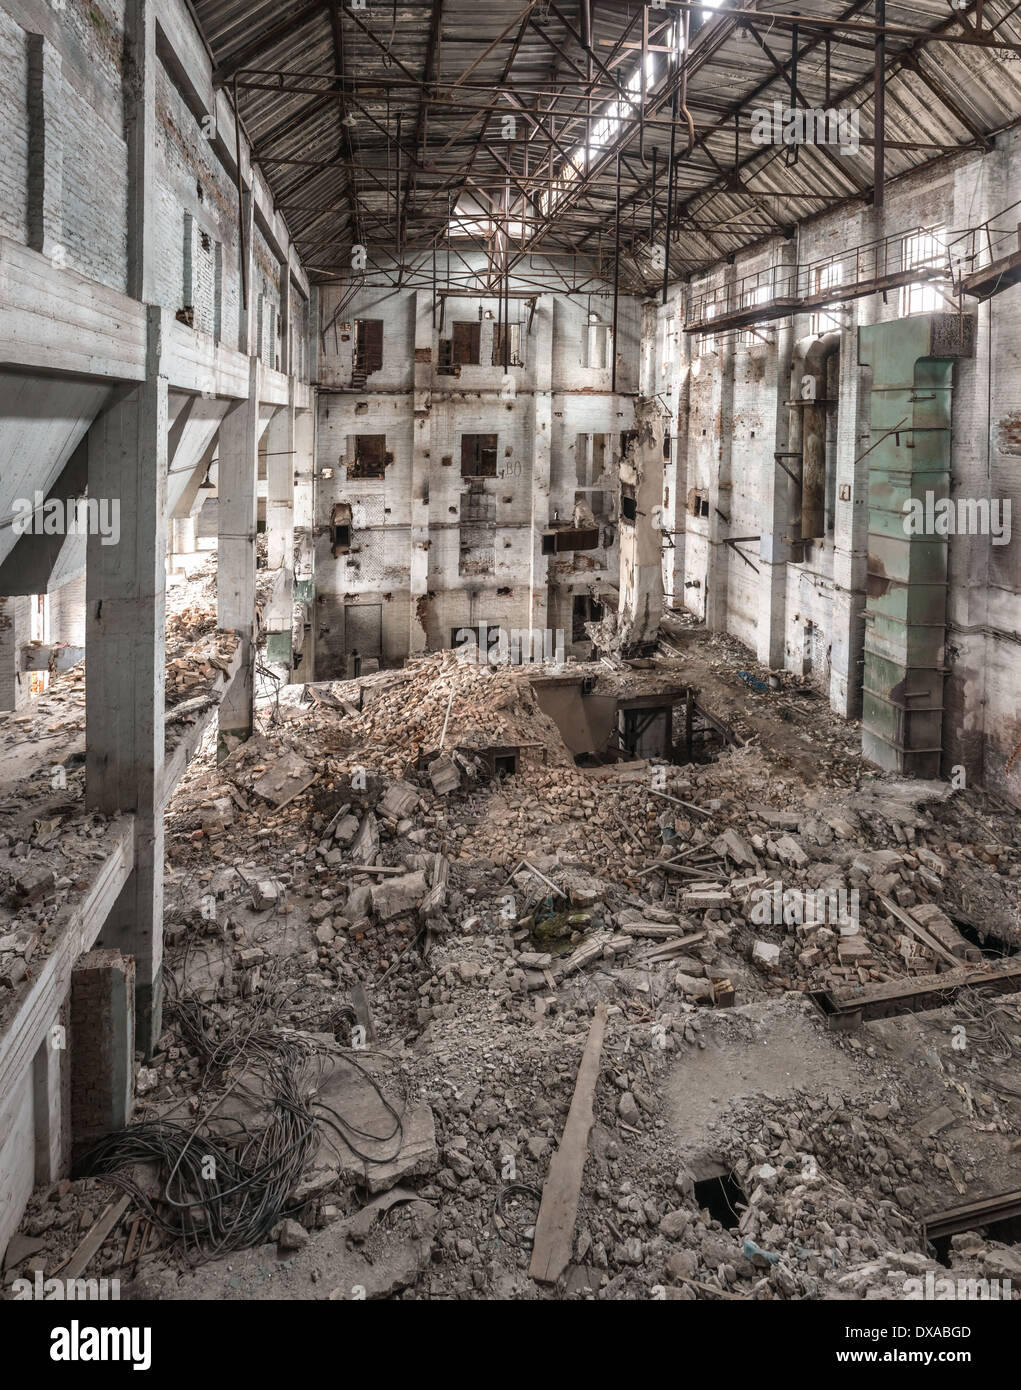 urban-exploration-old-ruined-factory-apartment-DXABGD.jpg